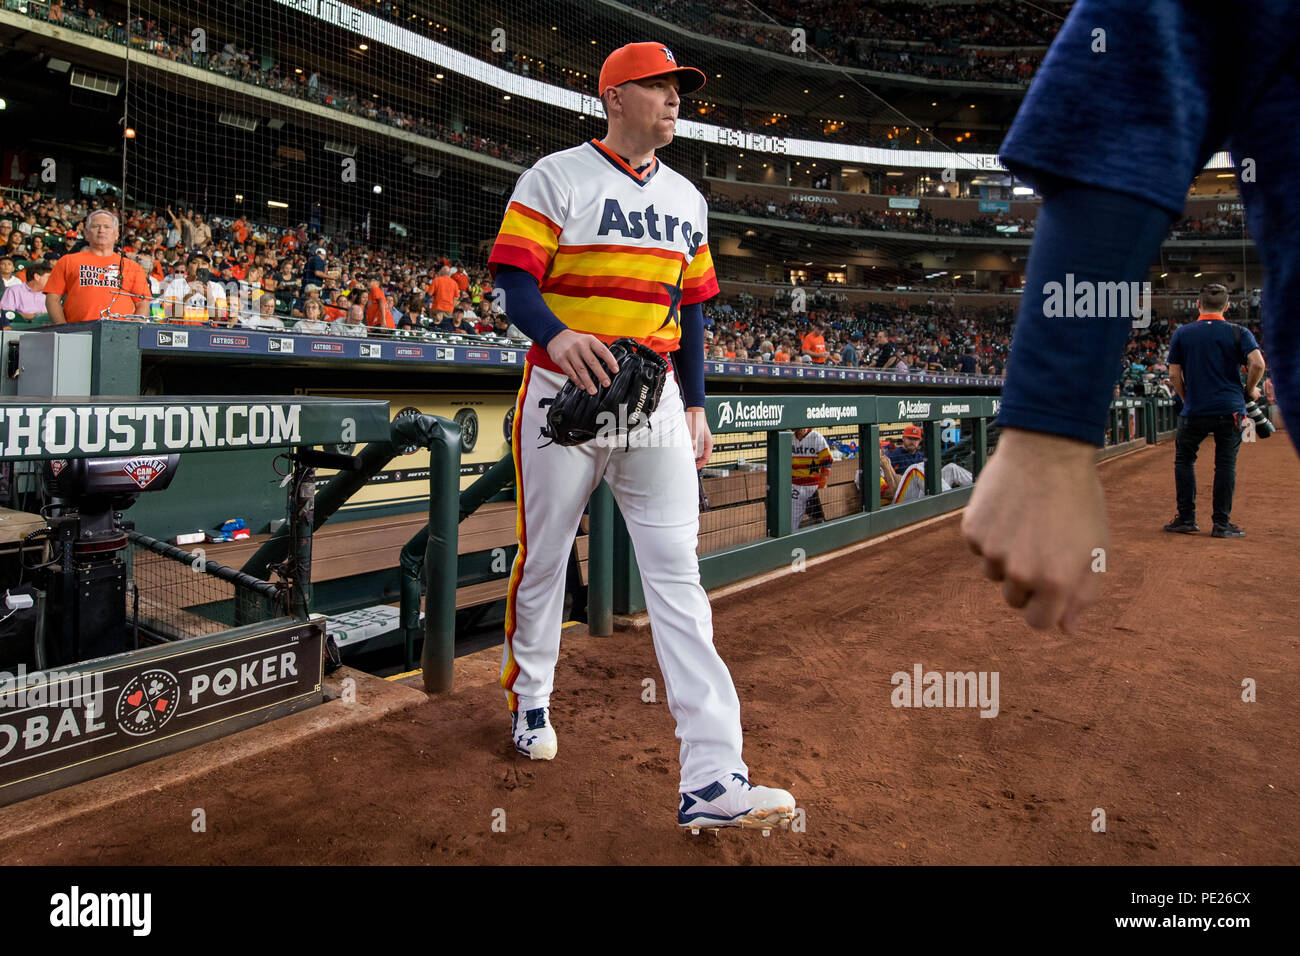 August 10, 2018:Houston Astros relief pitcher Will Harris (36) enters the  field prior to a Major League Baseball game between the Houston Astros and  the Seattle Mariners on 1970s night at Minute